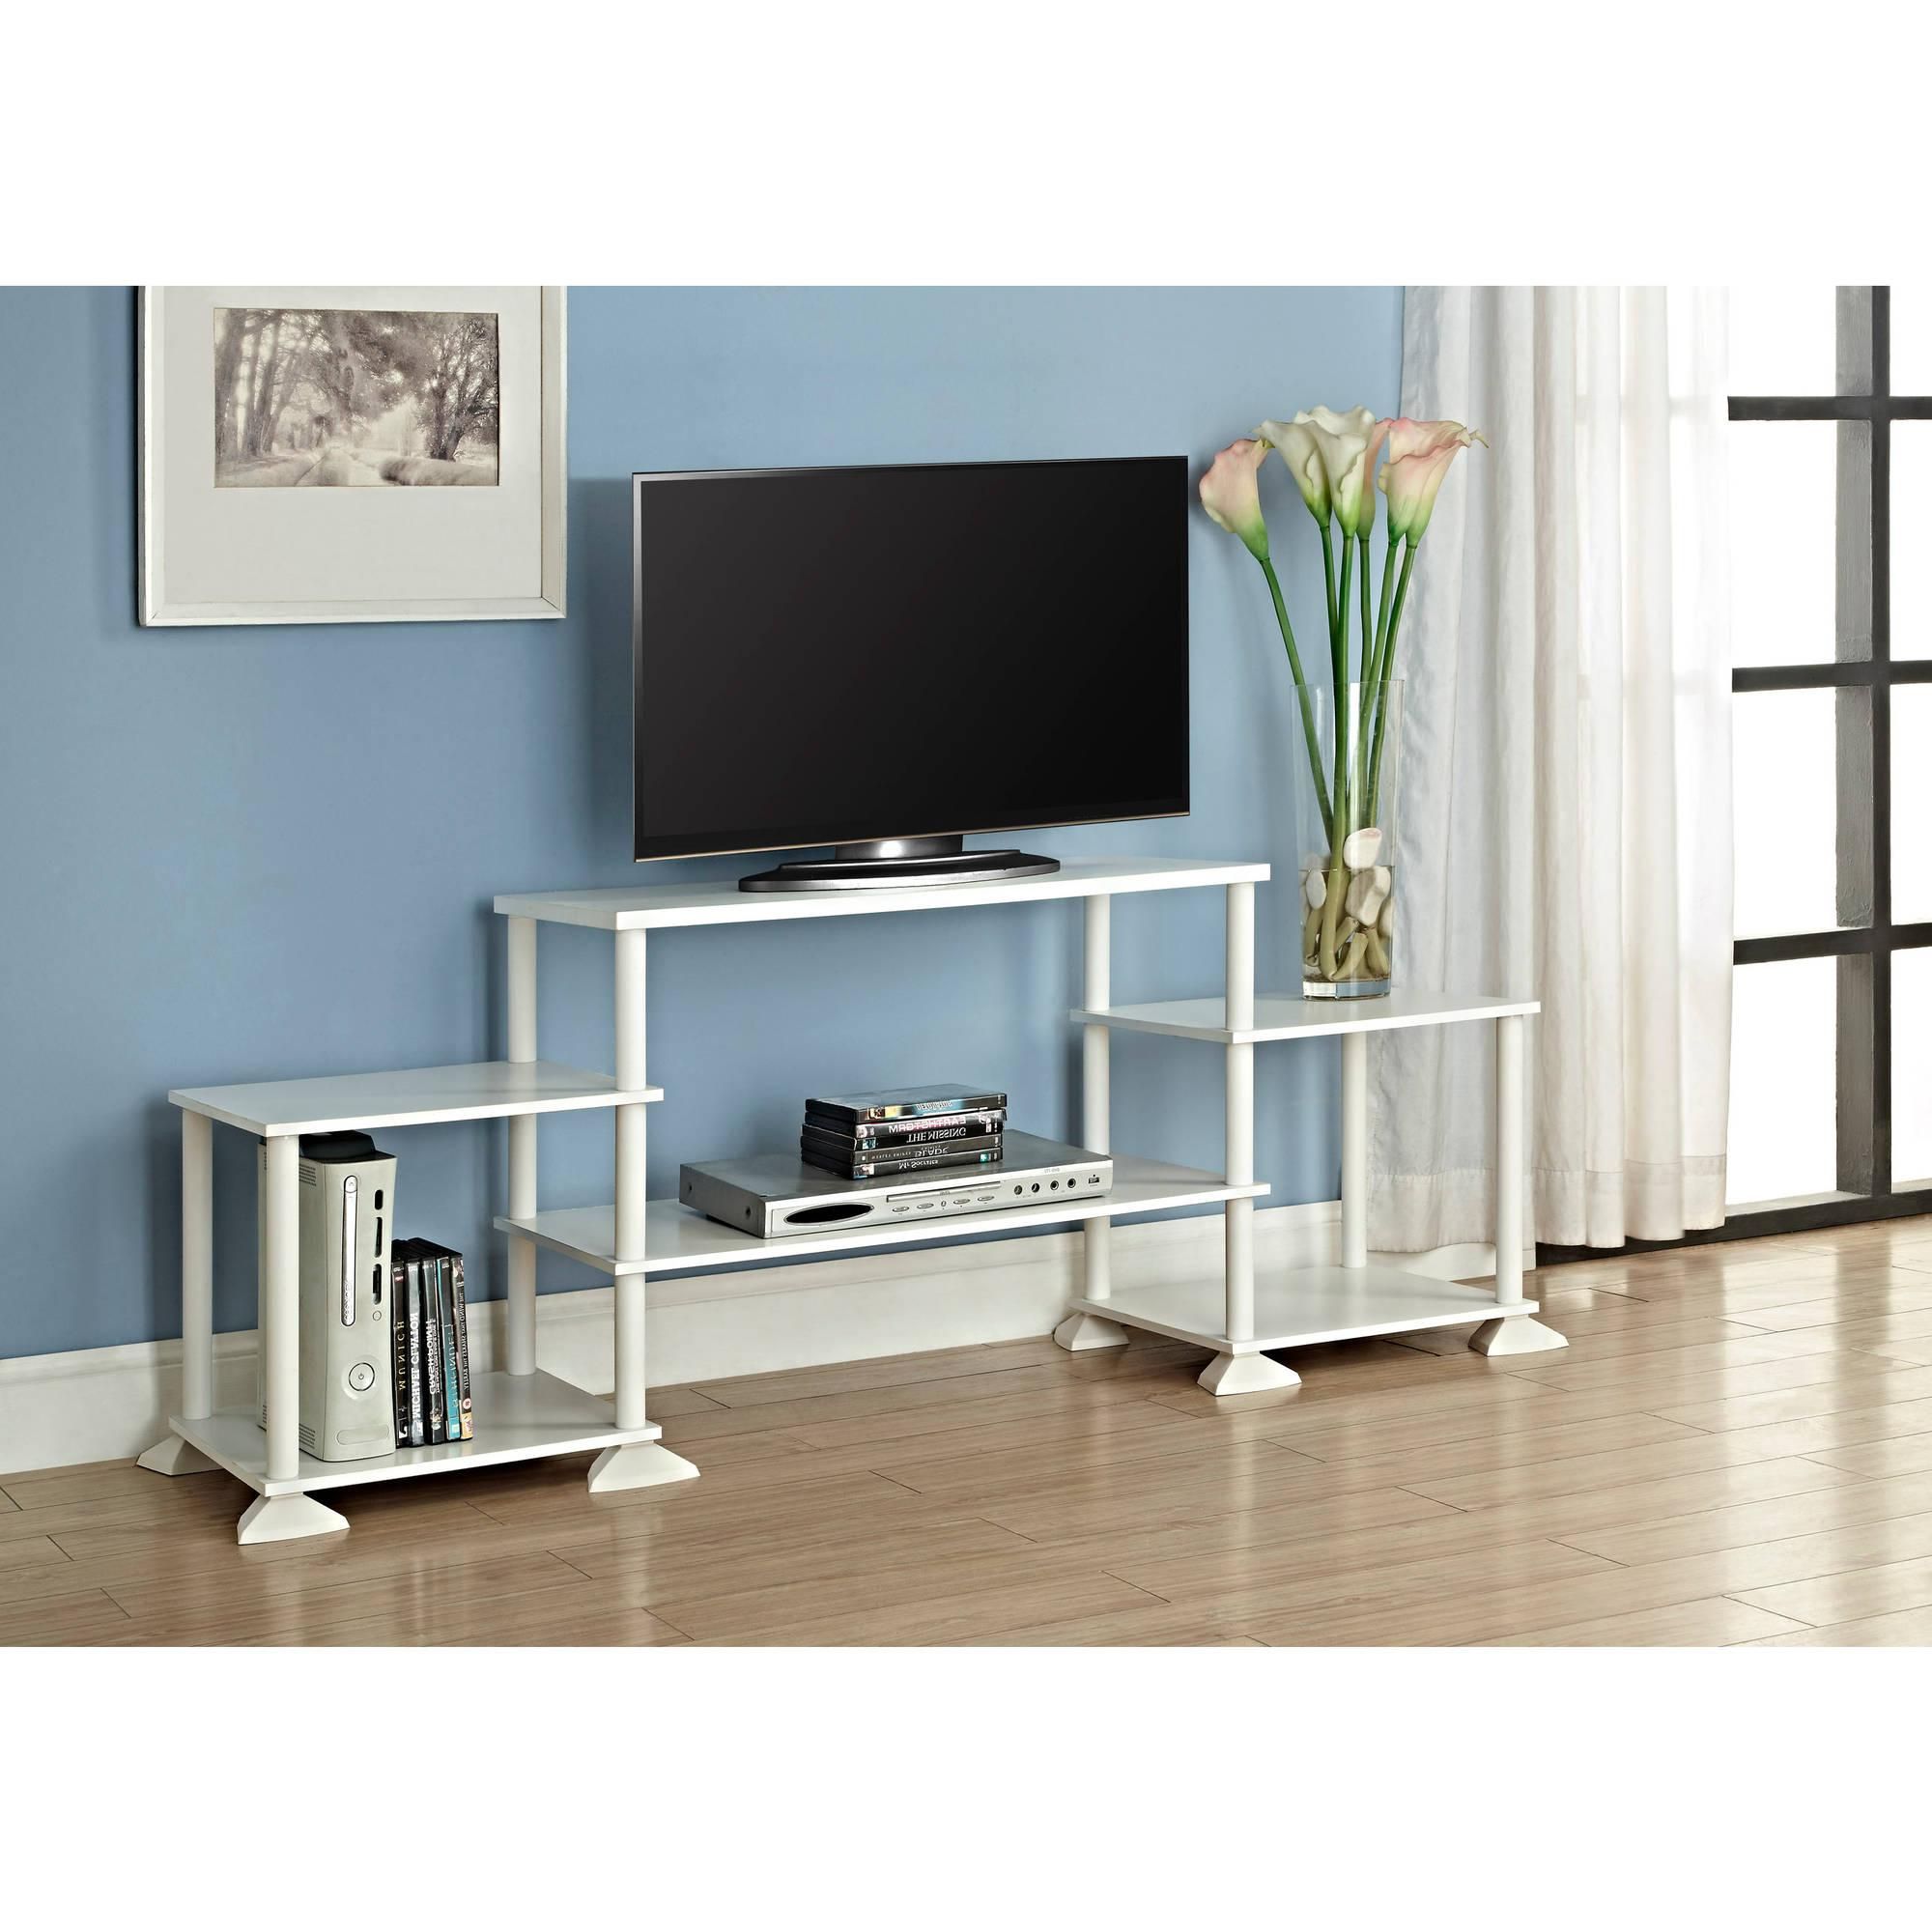 Flat Screen Tv Stands Corner Units Pertaining To Most Recently Released 55 Inch Tv Stand Corner For 65 Flat Screen 60 Costco Cottage 70 Wide (View 16 of 20)